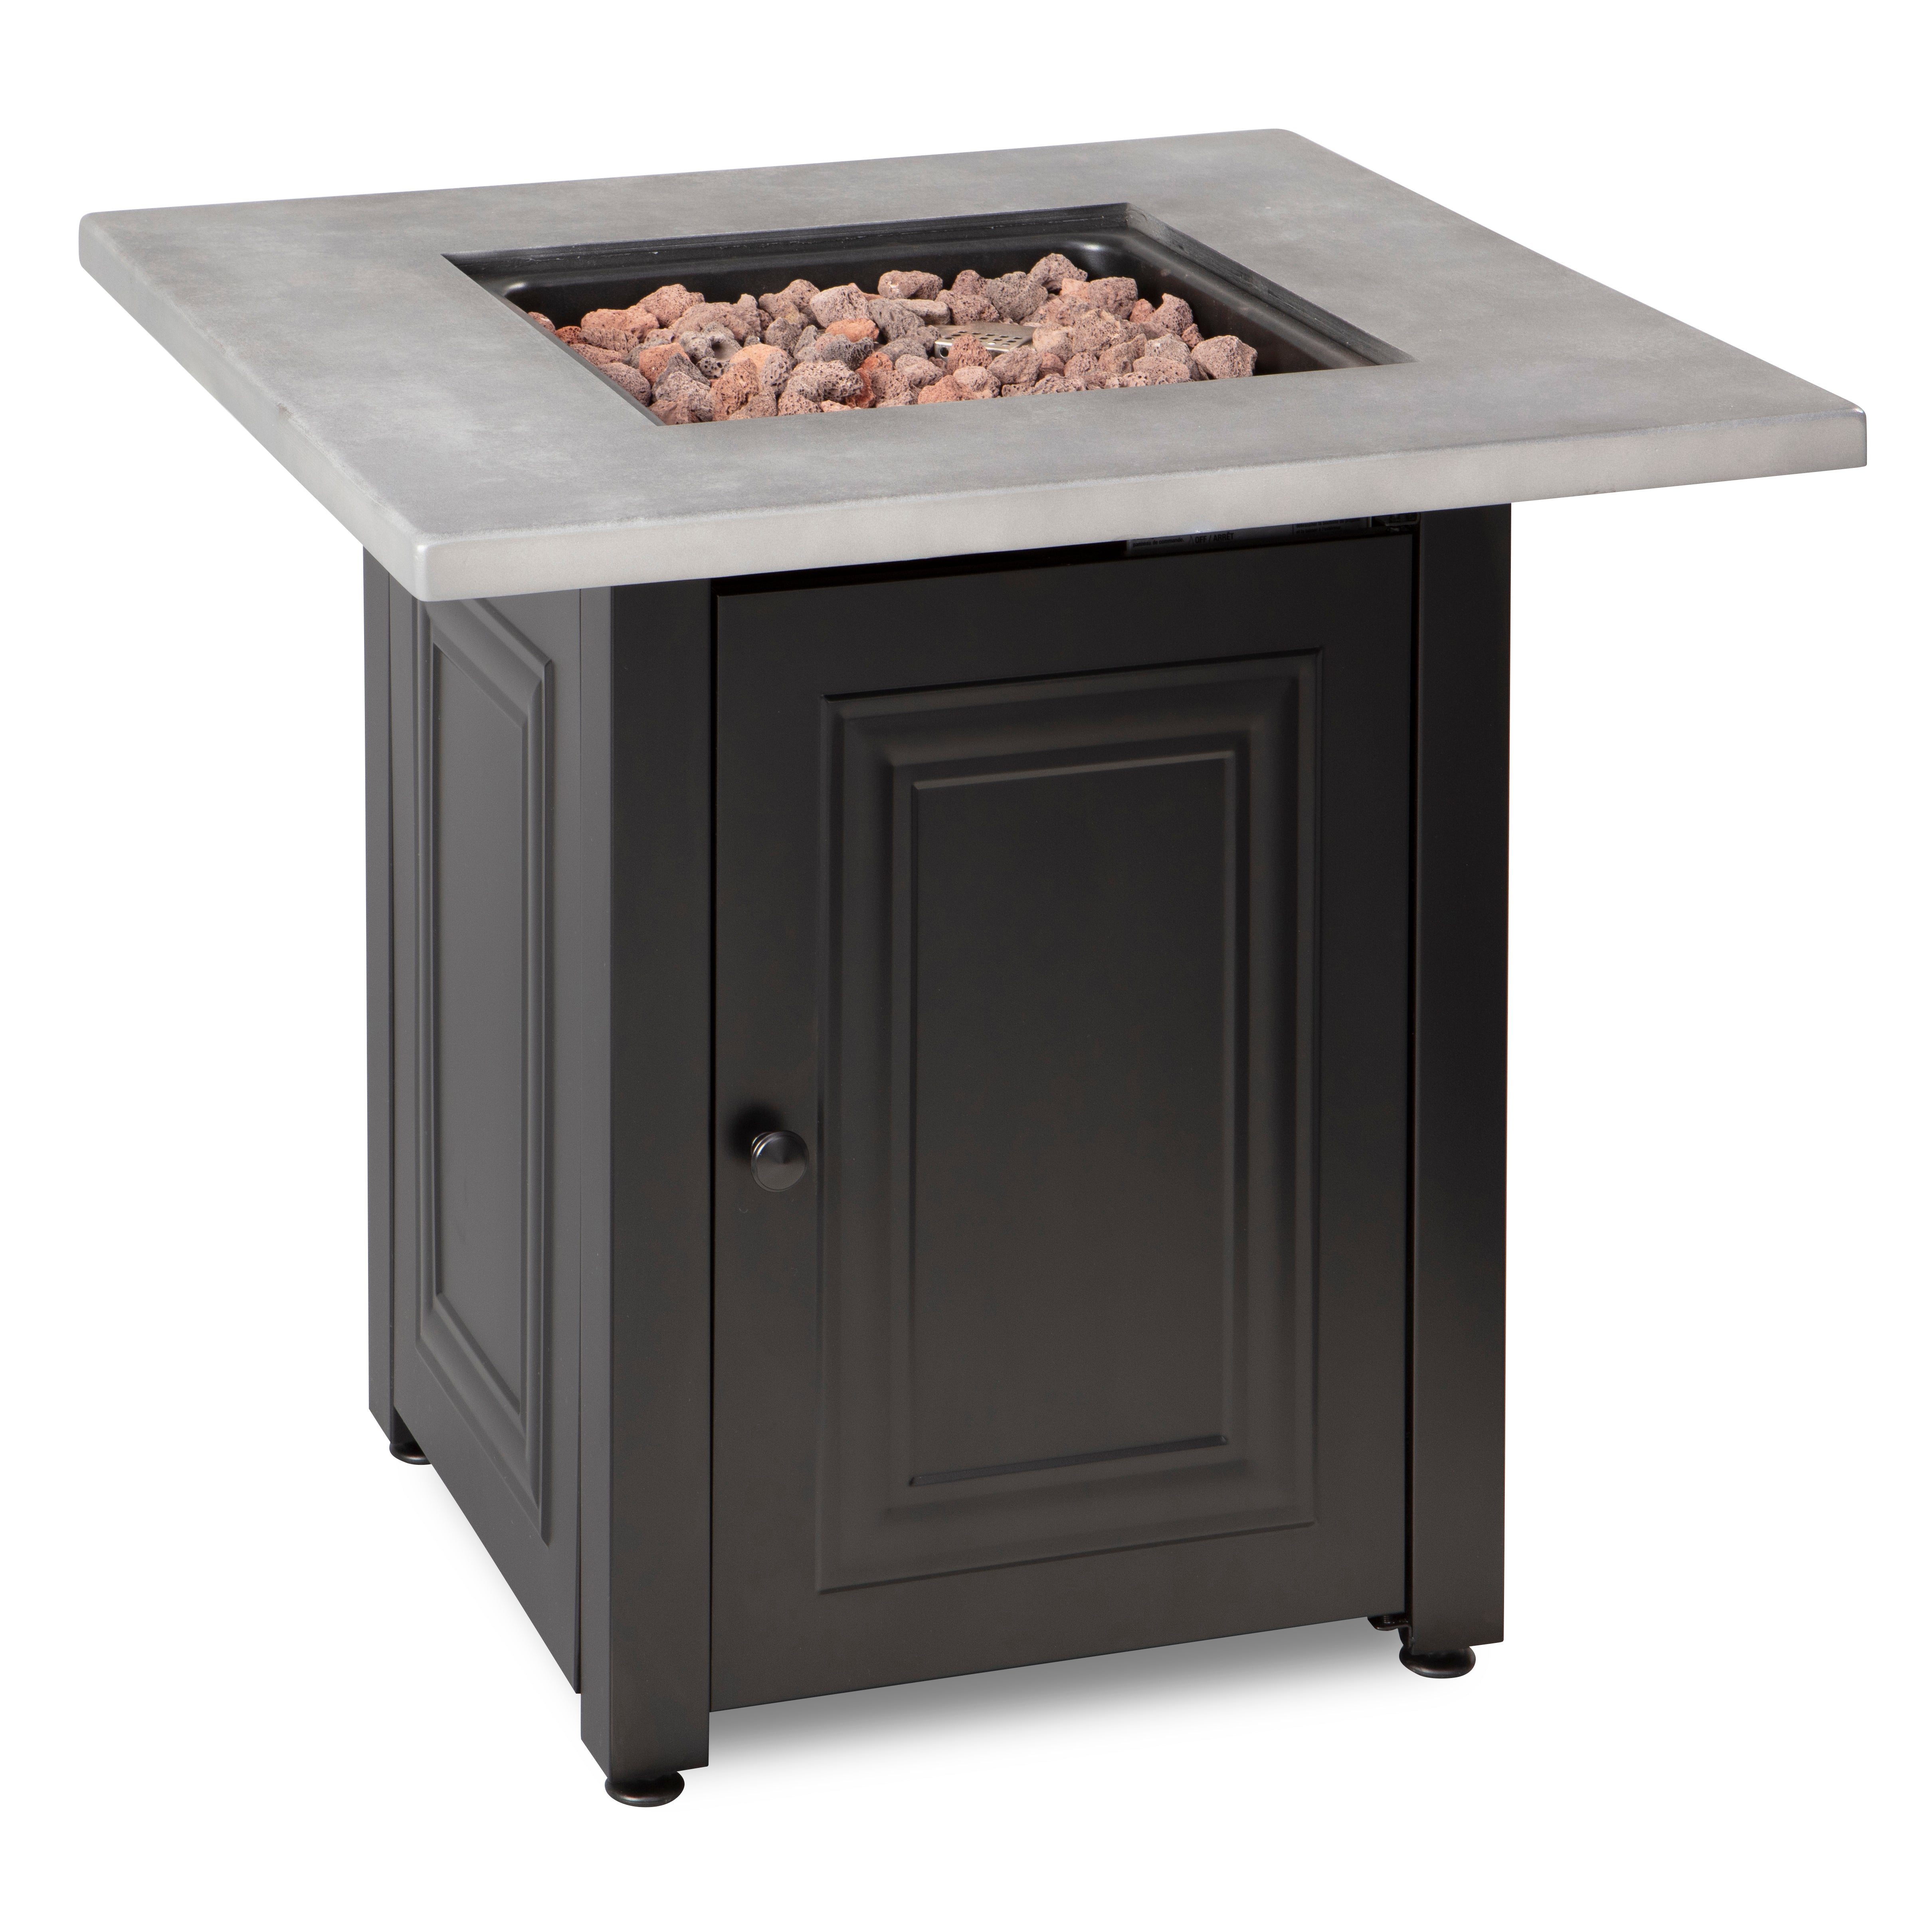 Endless Summer The Wakefield, LP Gas Outdoor Fire Pit with Concrete Resin Mantel